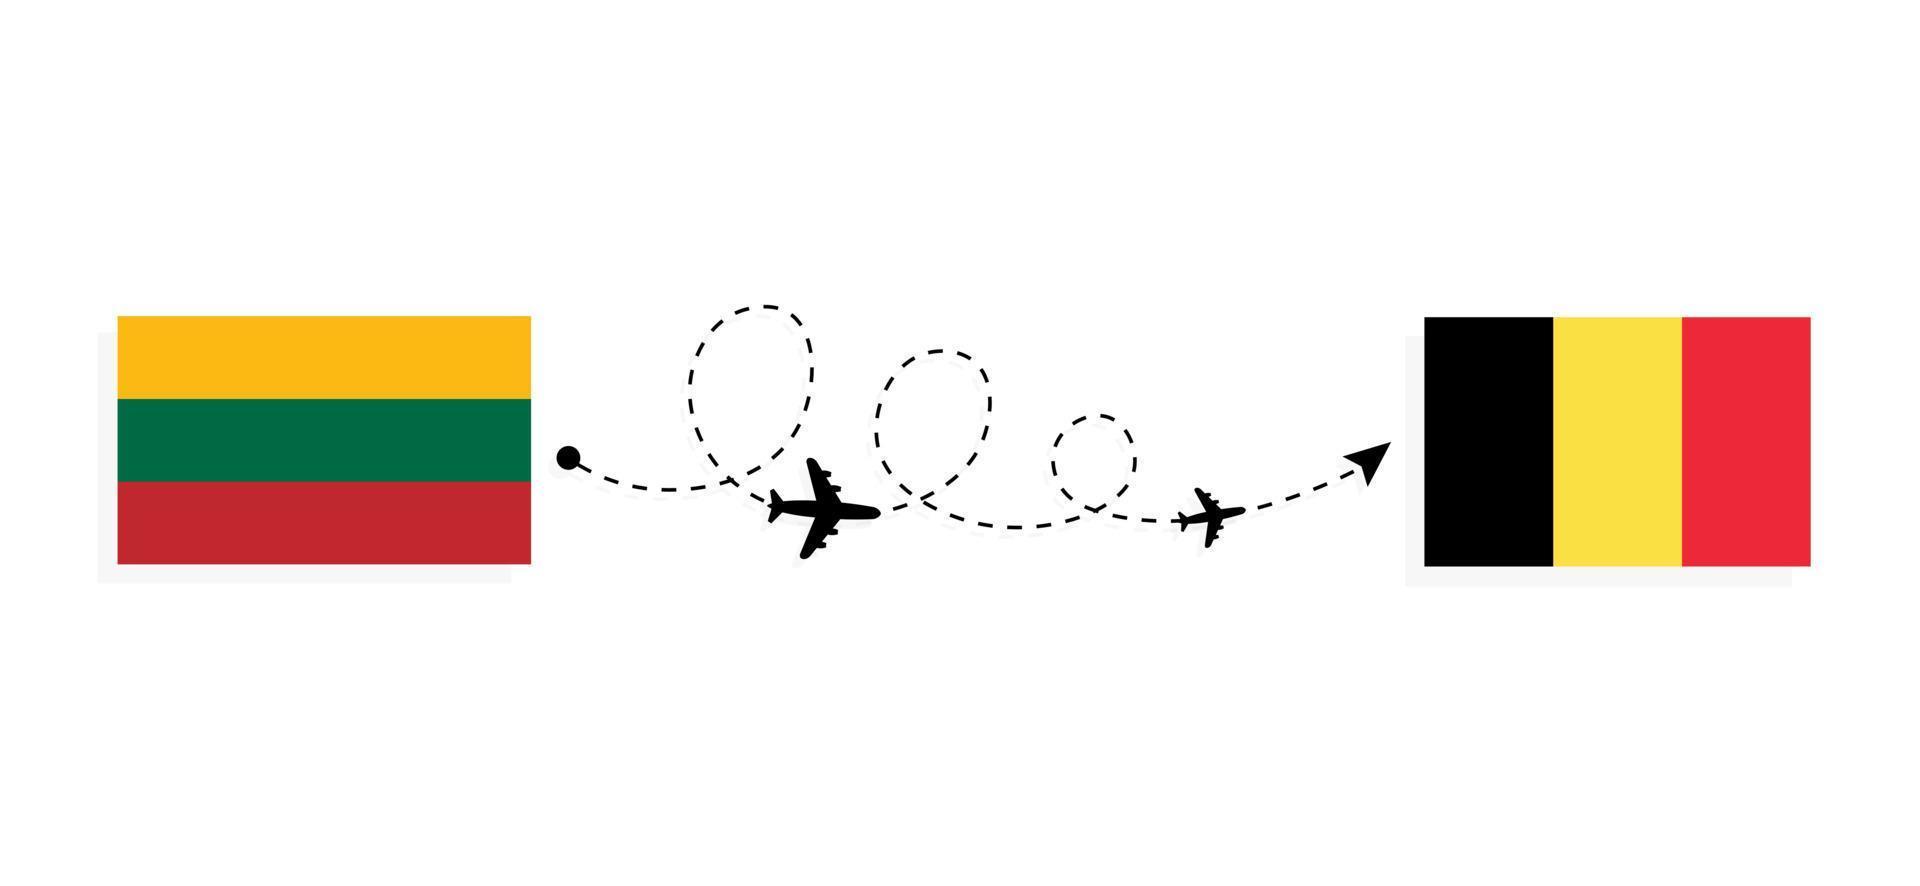 Flight and travel from Lithuania to Belgium by passenger airplane Travel concept vector